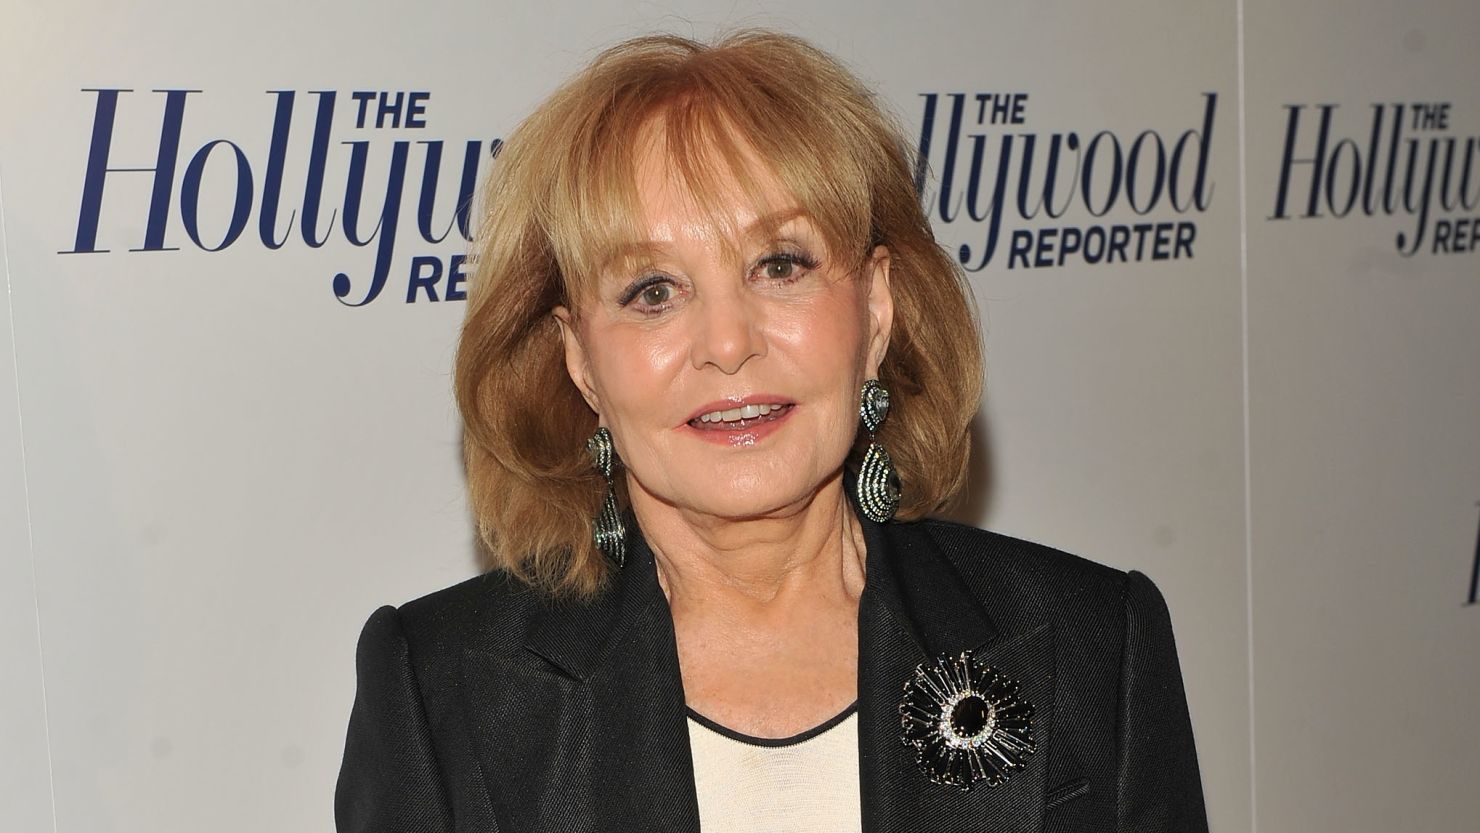 ABC's Barbara Walters acknowledged her recommending the daughter of a Syrian diplomat created a conflict of interest.